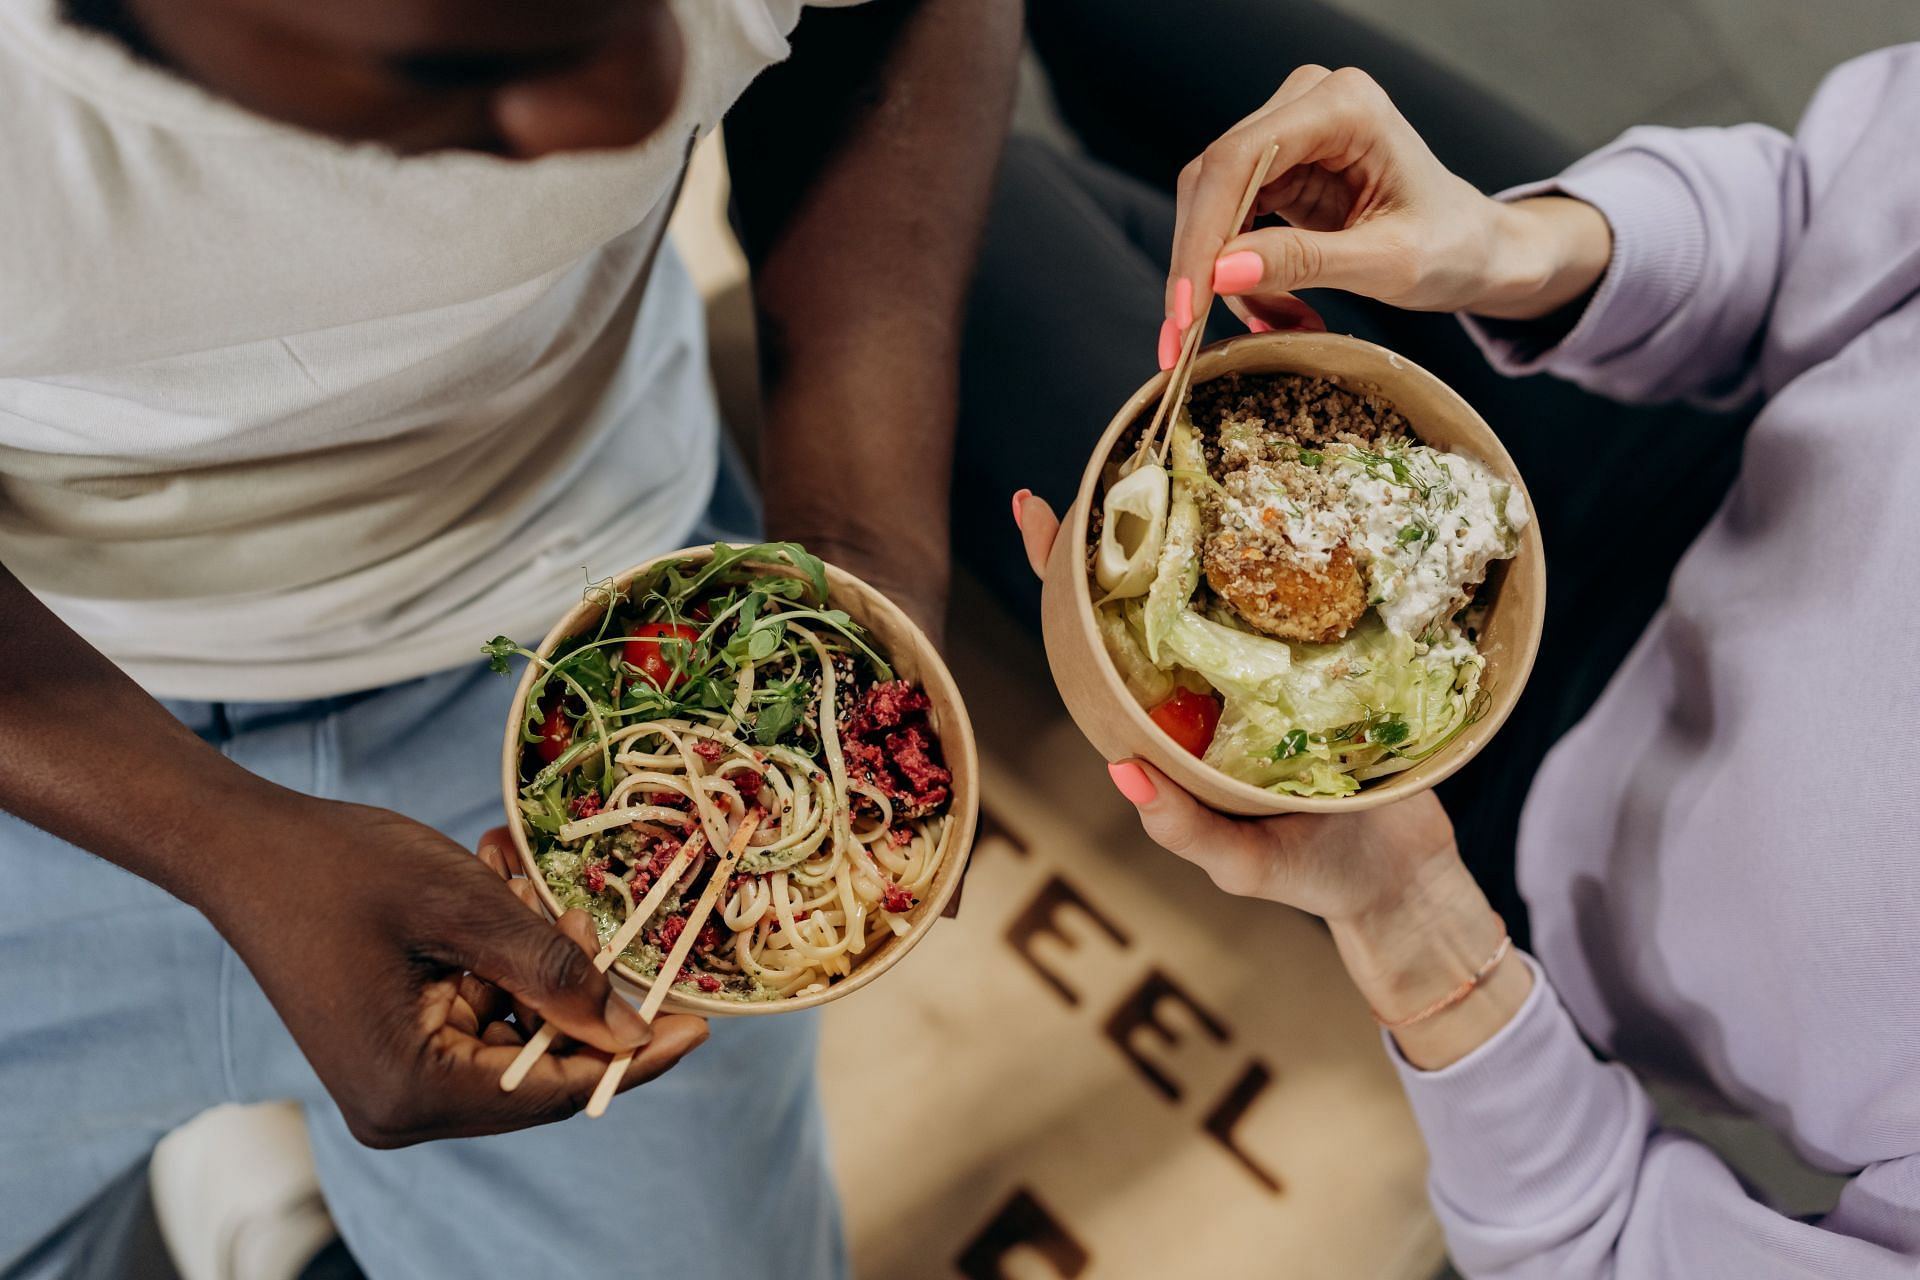 The mood and food connection is real. (Photo via Pexels/Mikhail Nilov)